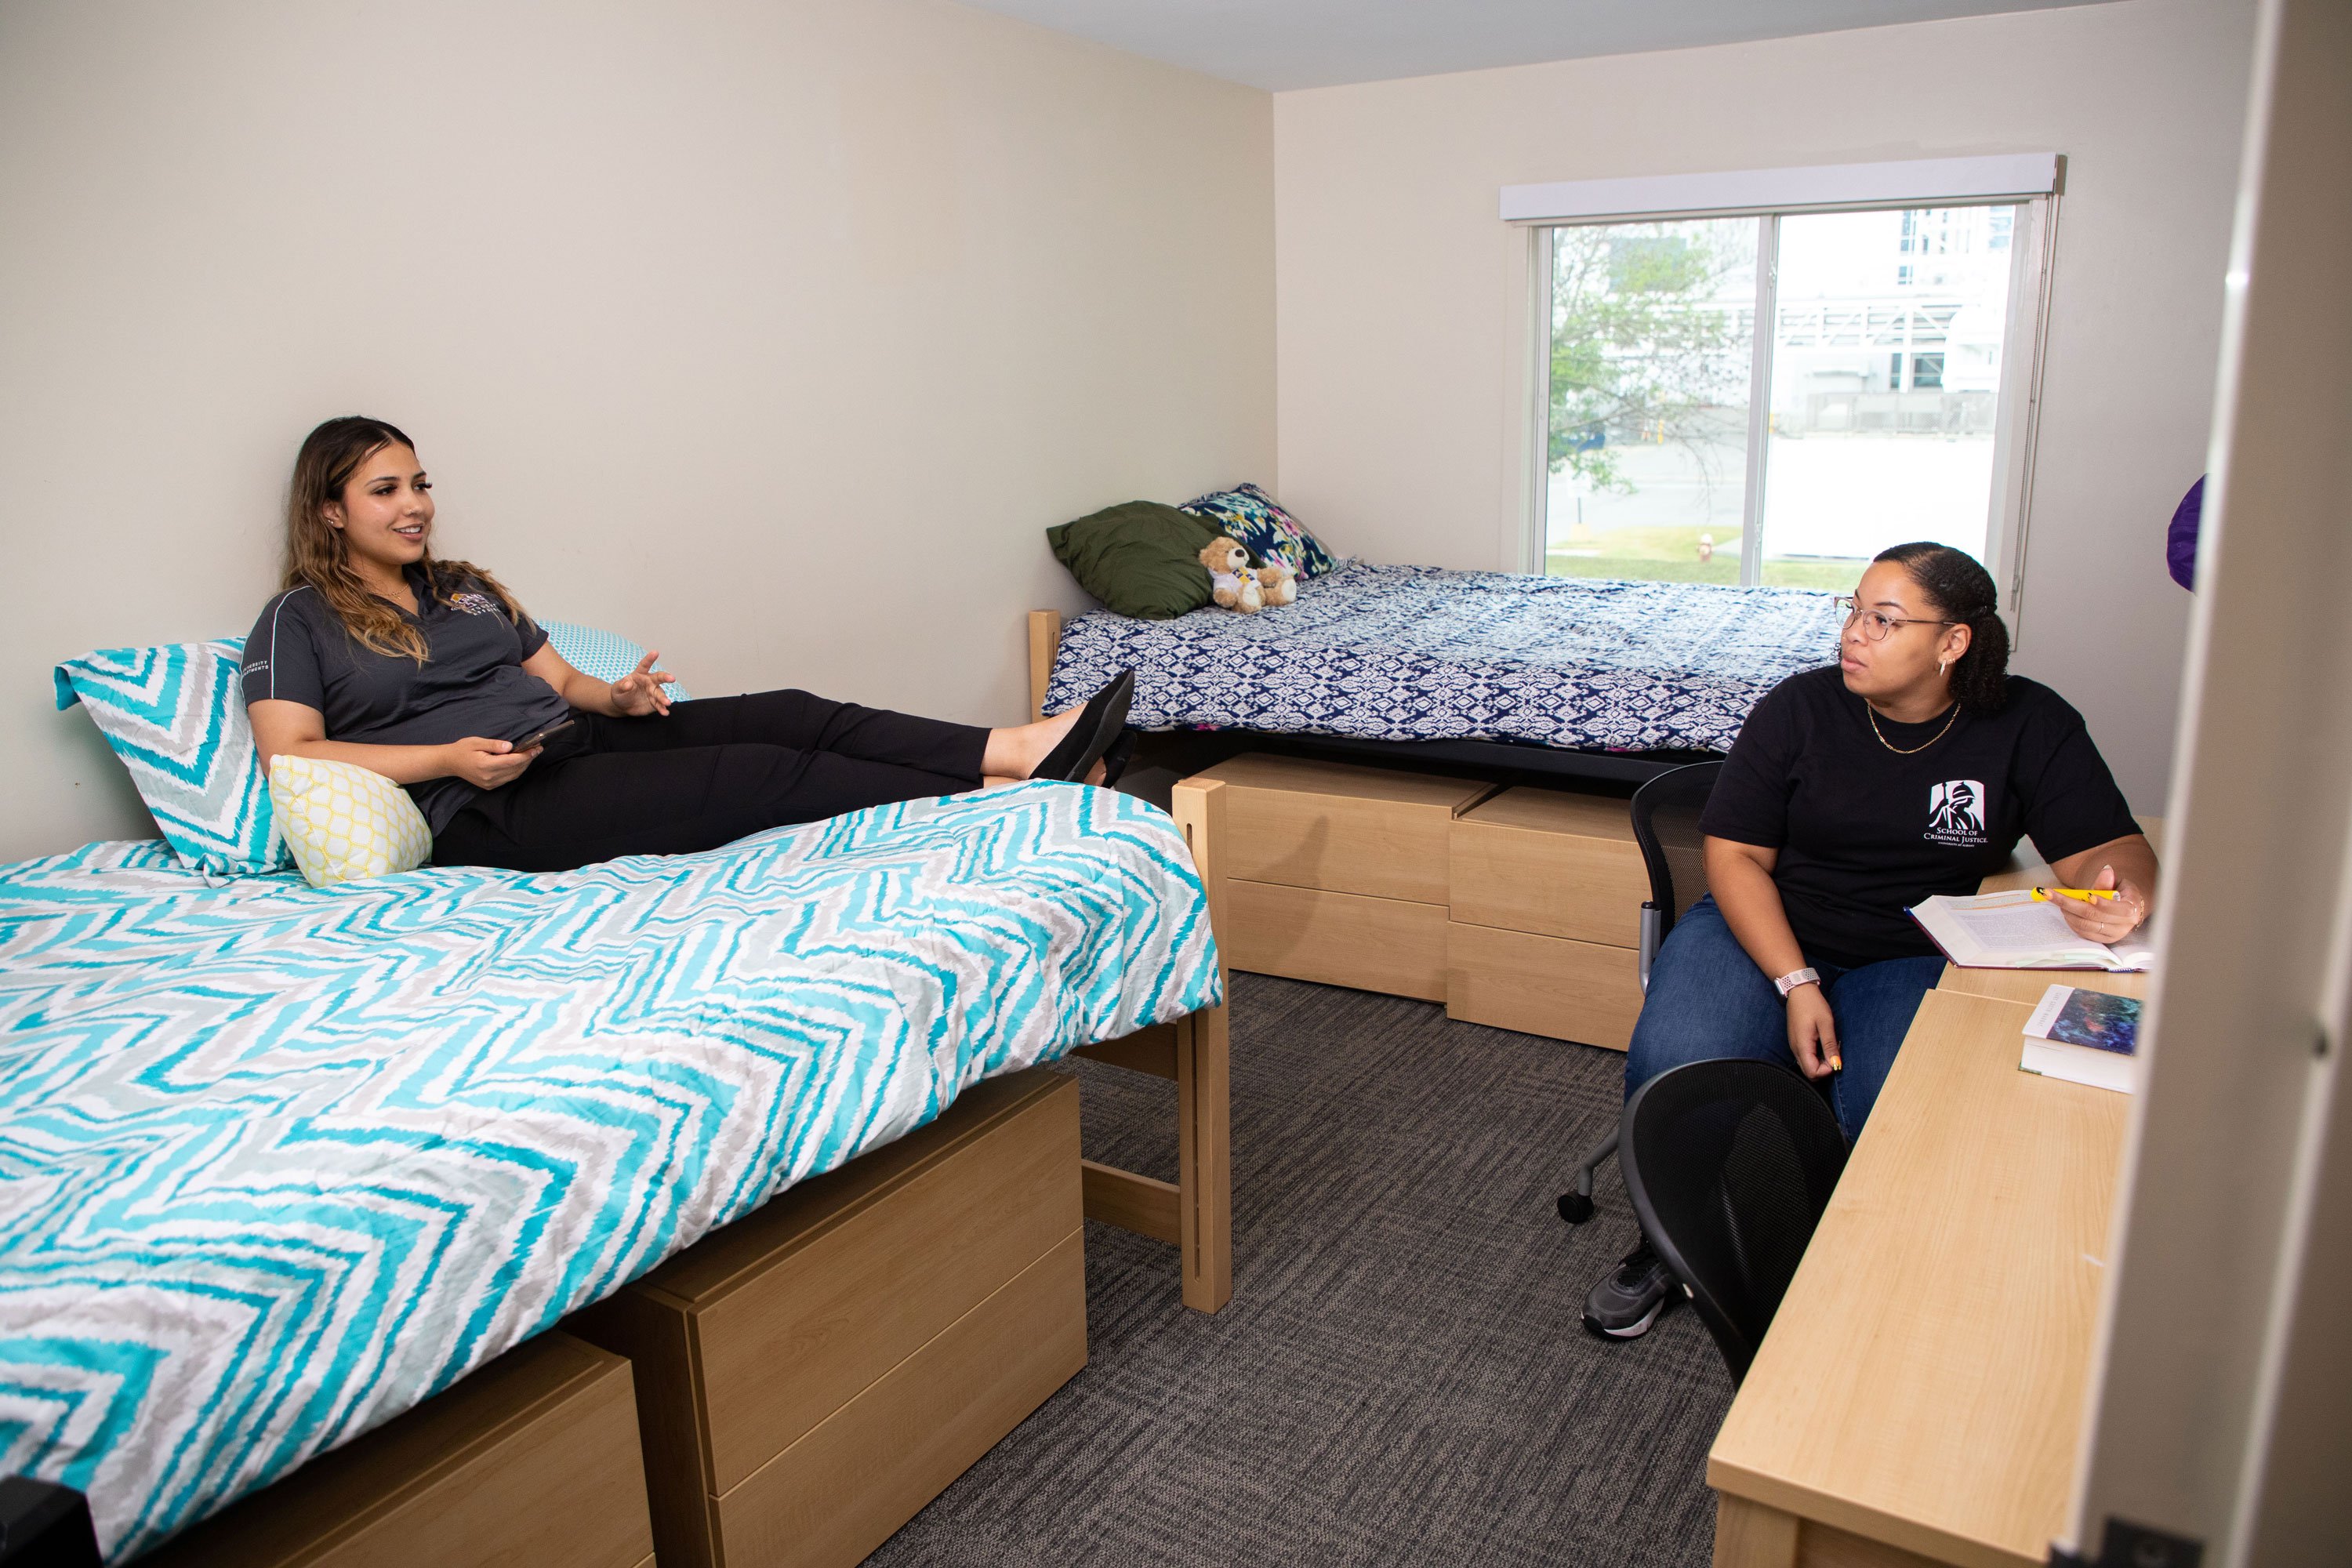 Two students talk inside a double room with two full-sized beds. One student sits on a bed with a phone and another with a text book and highlighter at her desk.